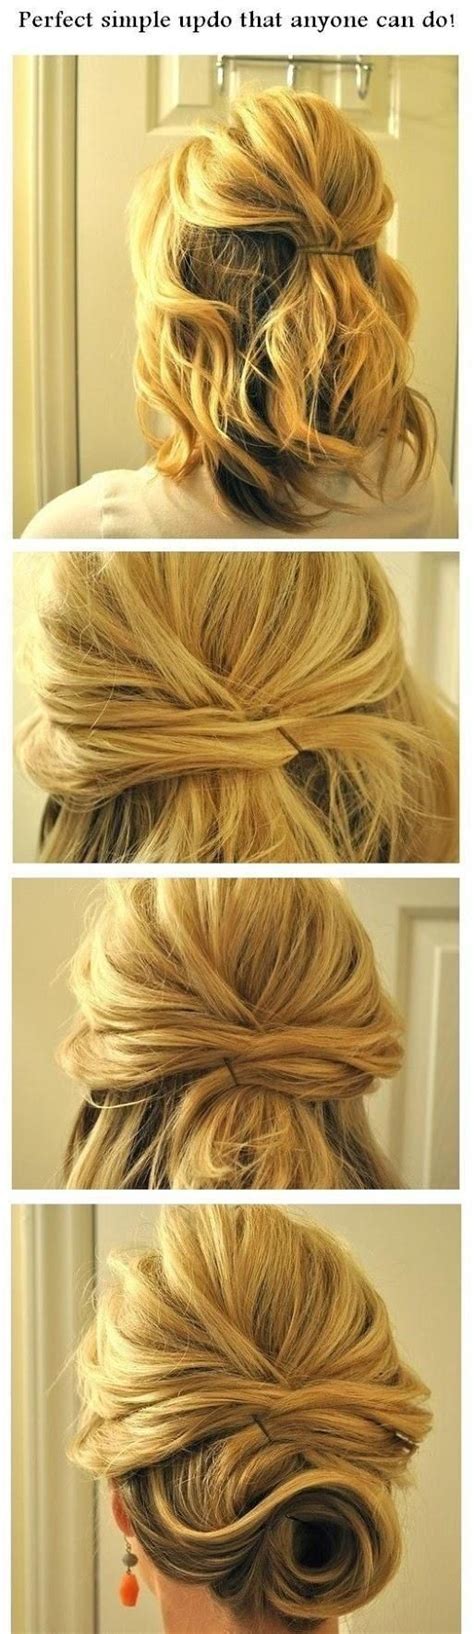 Gorgeous short hair inspo for thin hair, thick hair, and beyond. 14 Easy Step by Step Updo Hairstyles Tutorials - Pretty ...